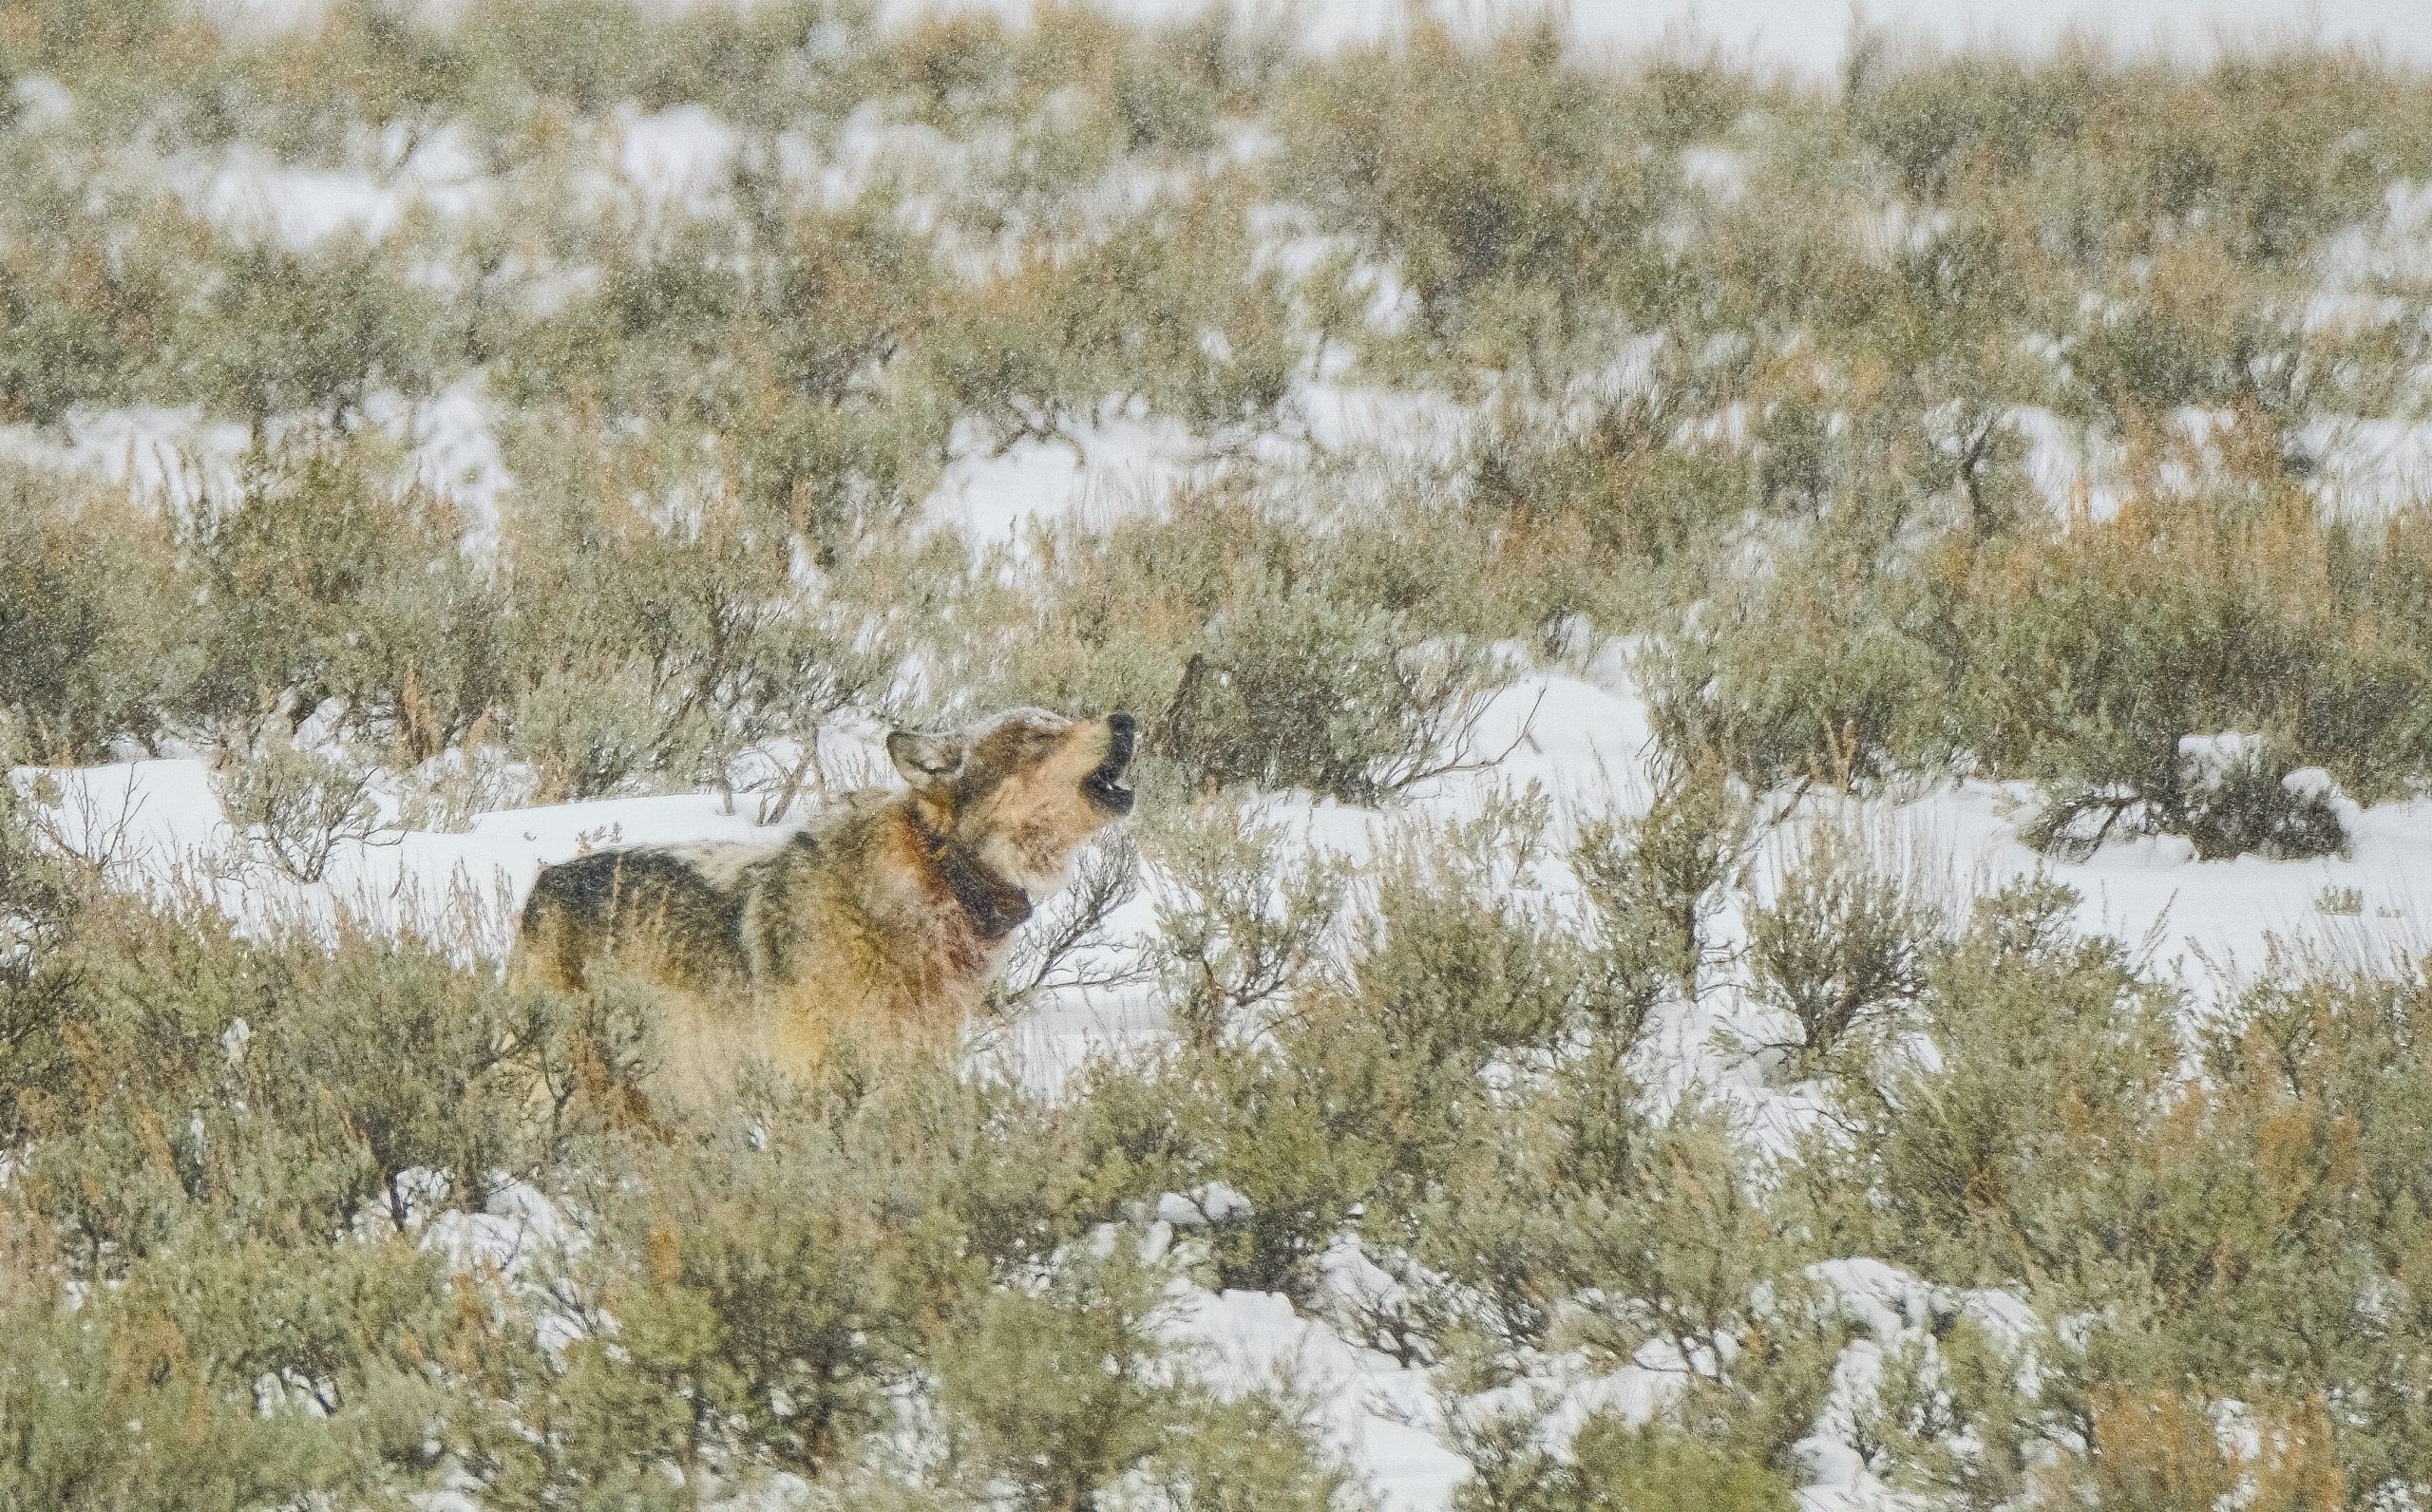 history of wolves in yellowstone